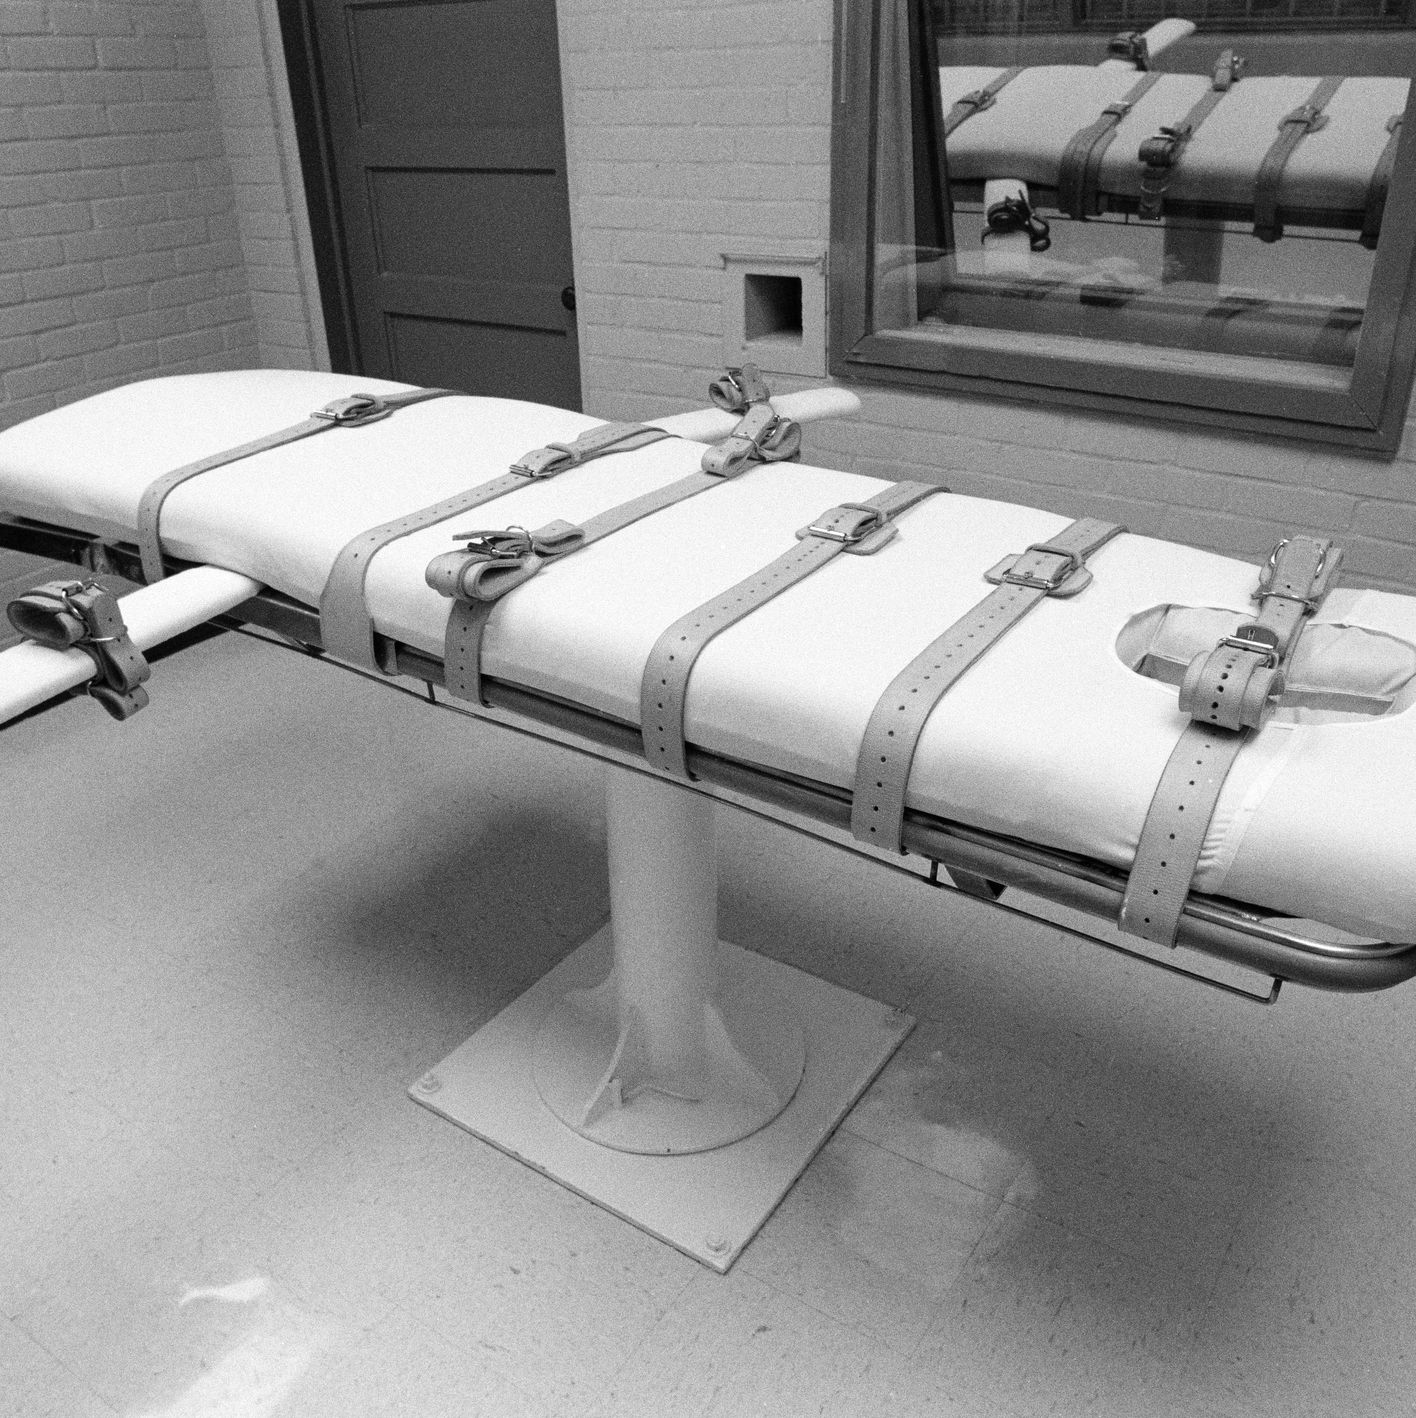 This Man Survived One Execution. Now, Alabama Will Try to Kill Him Again—With Nitrogen Gas.